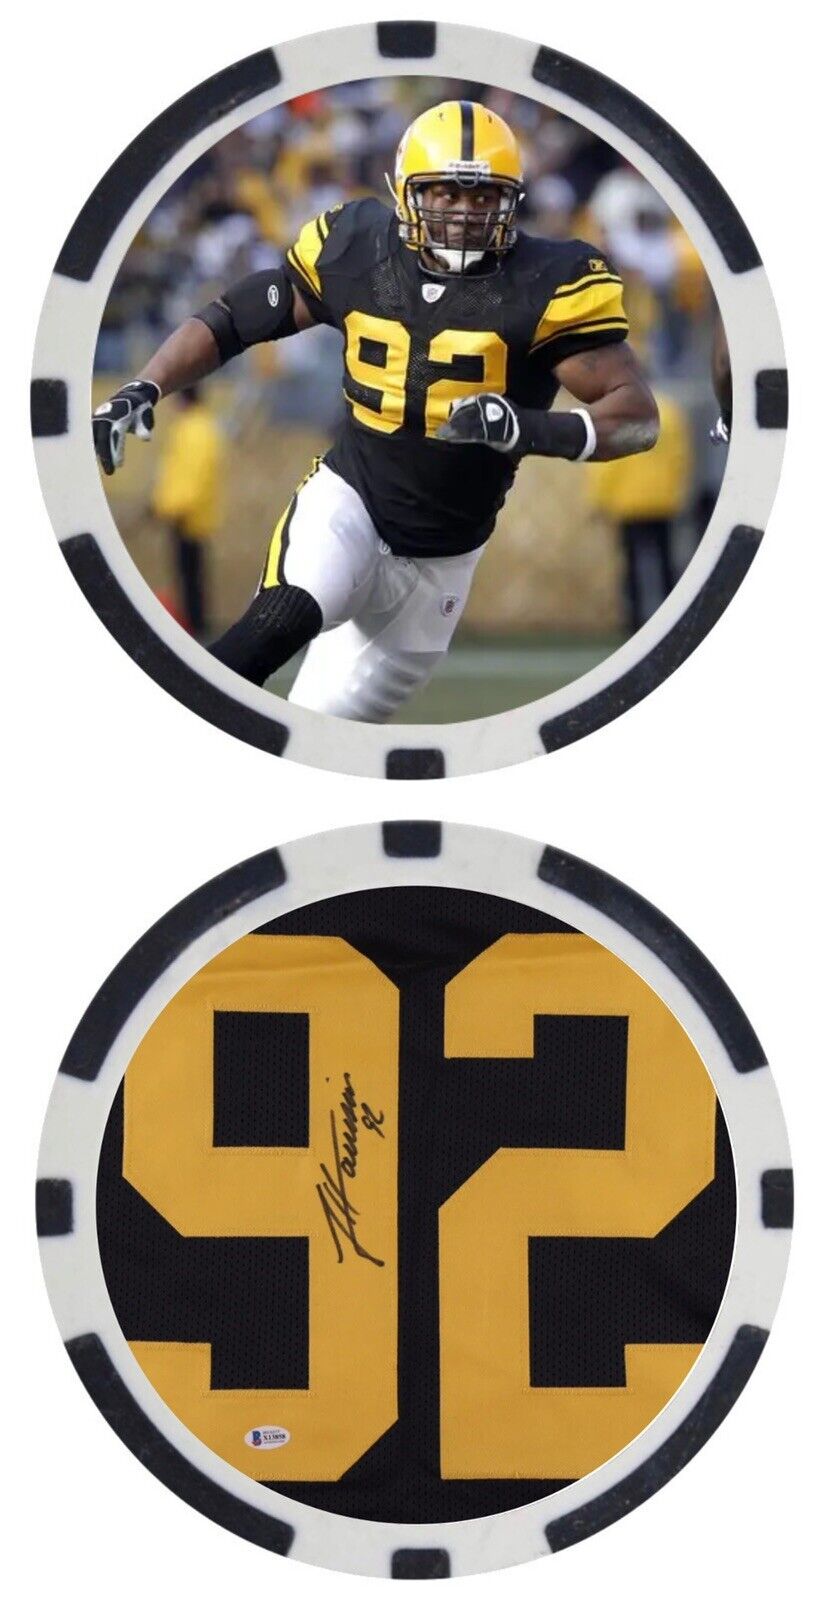 JAMES HARRISON - PITTSBURGH STEELERS - POKER CHIP/BALL MARKER *SIGNED/AUTO**